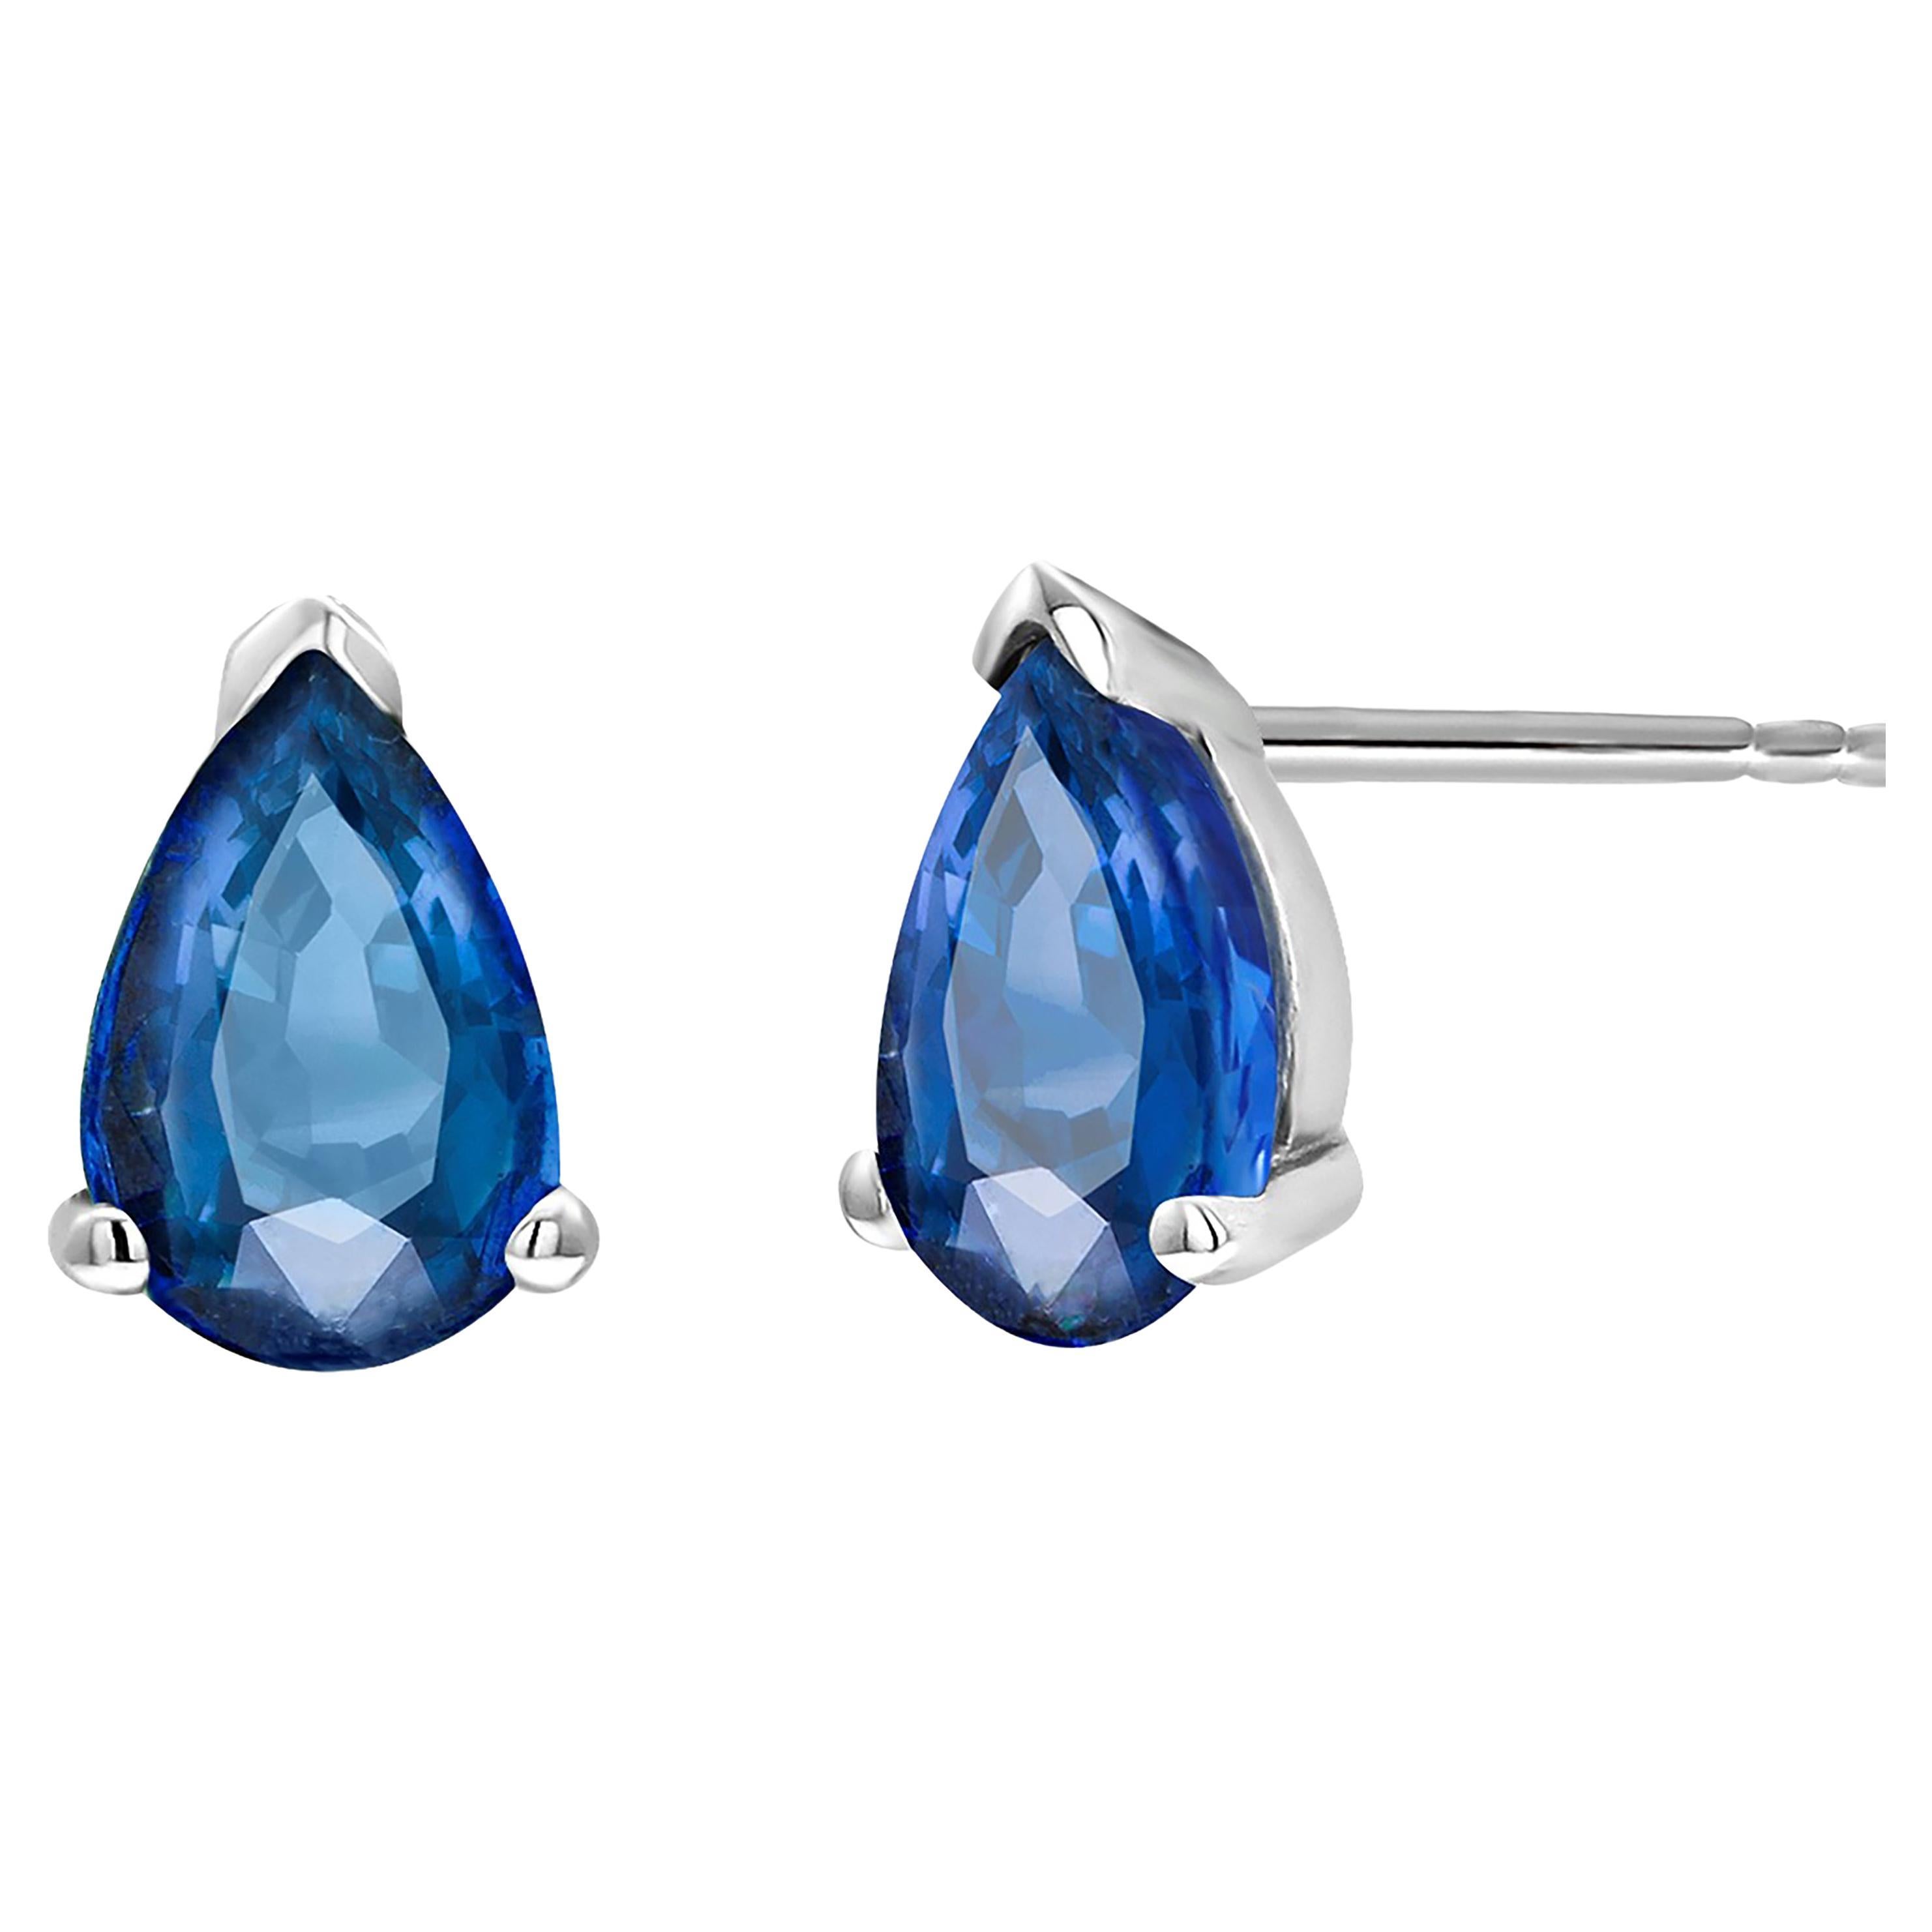 Pair Blue Pear Shape Sapphire White Gold Stud Earrings Weighing 1.45 Carats